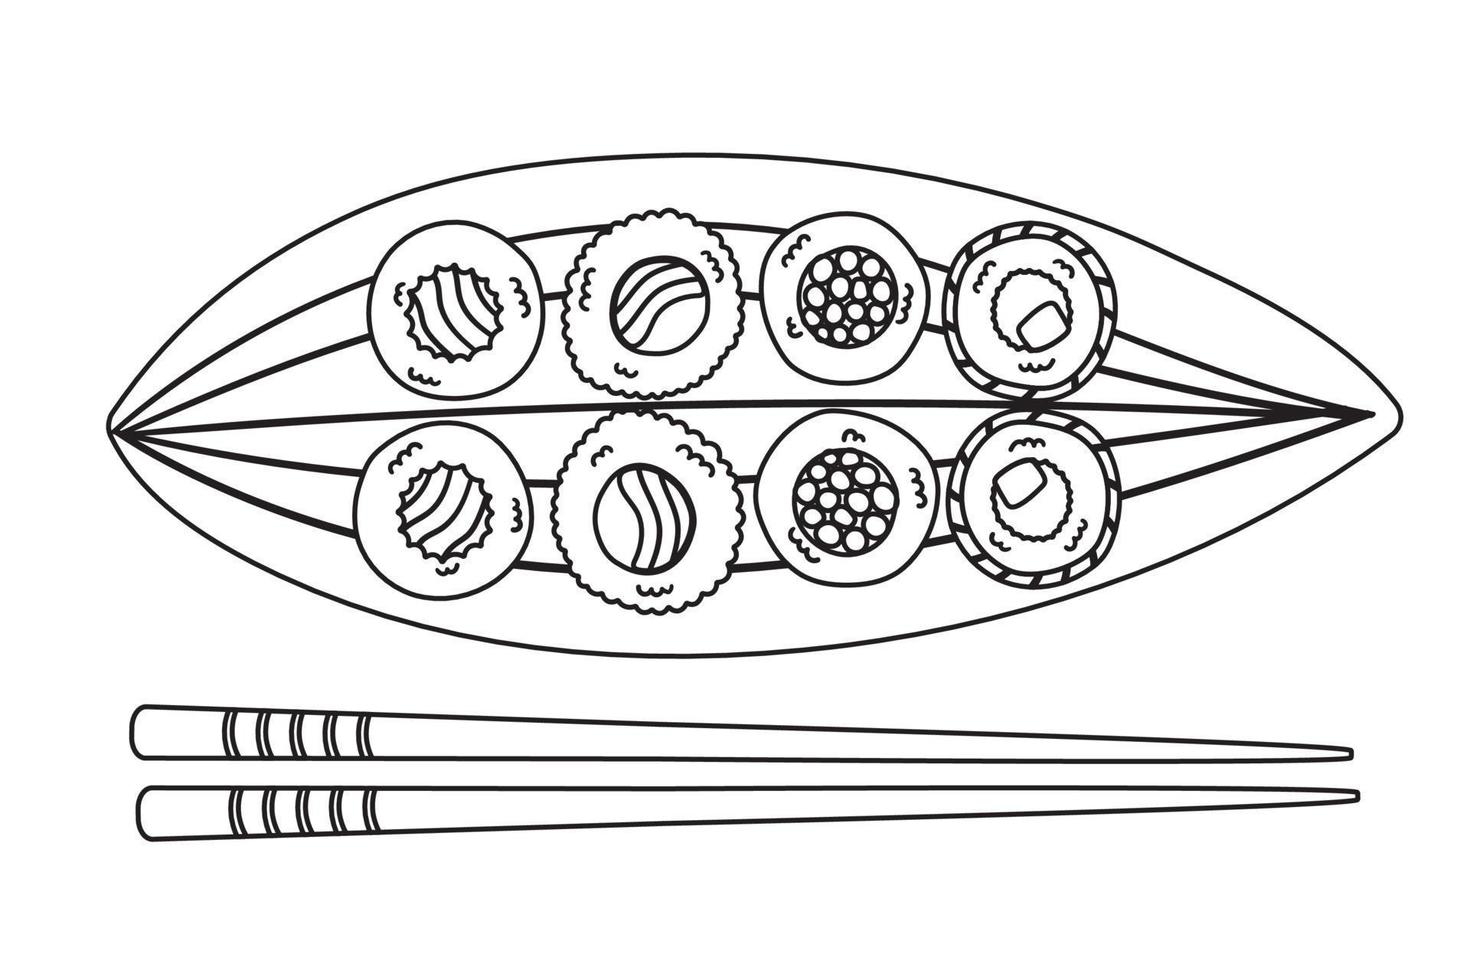 Traditional japanese sushi and rolls, and chopsticks serving on leaf vector